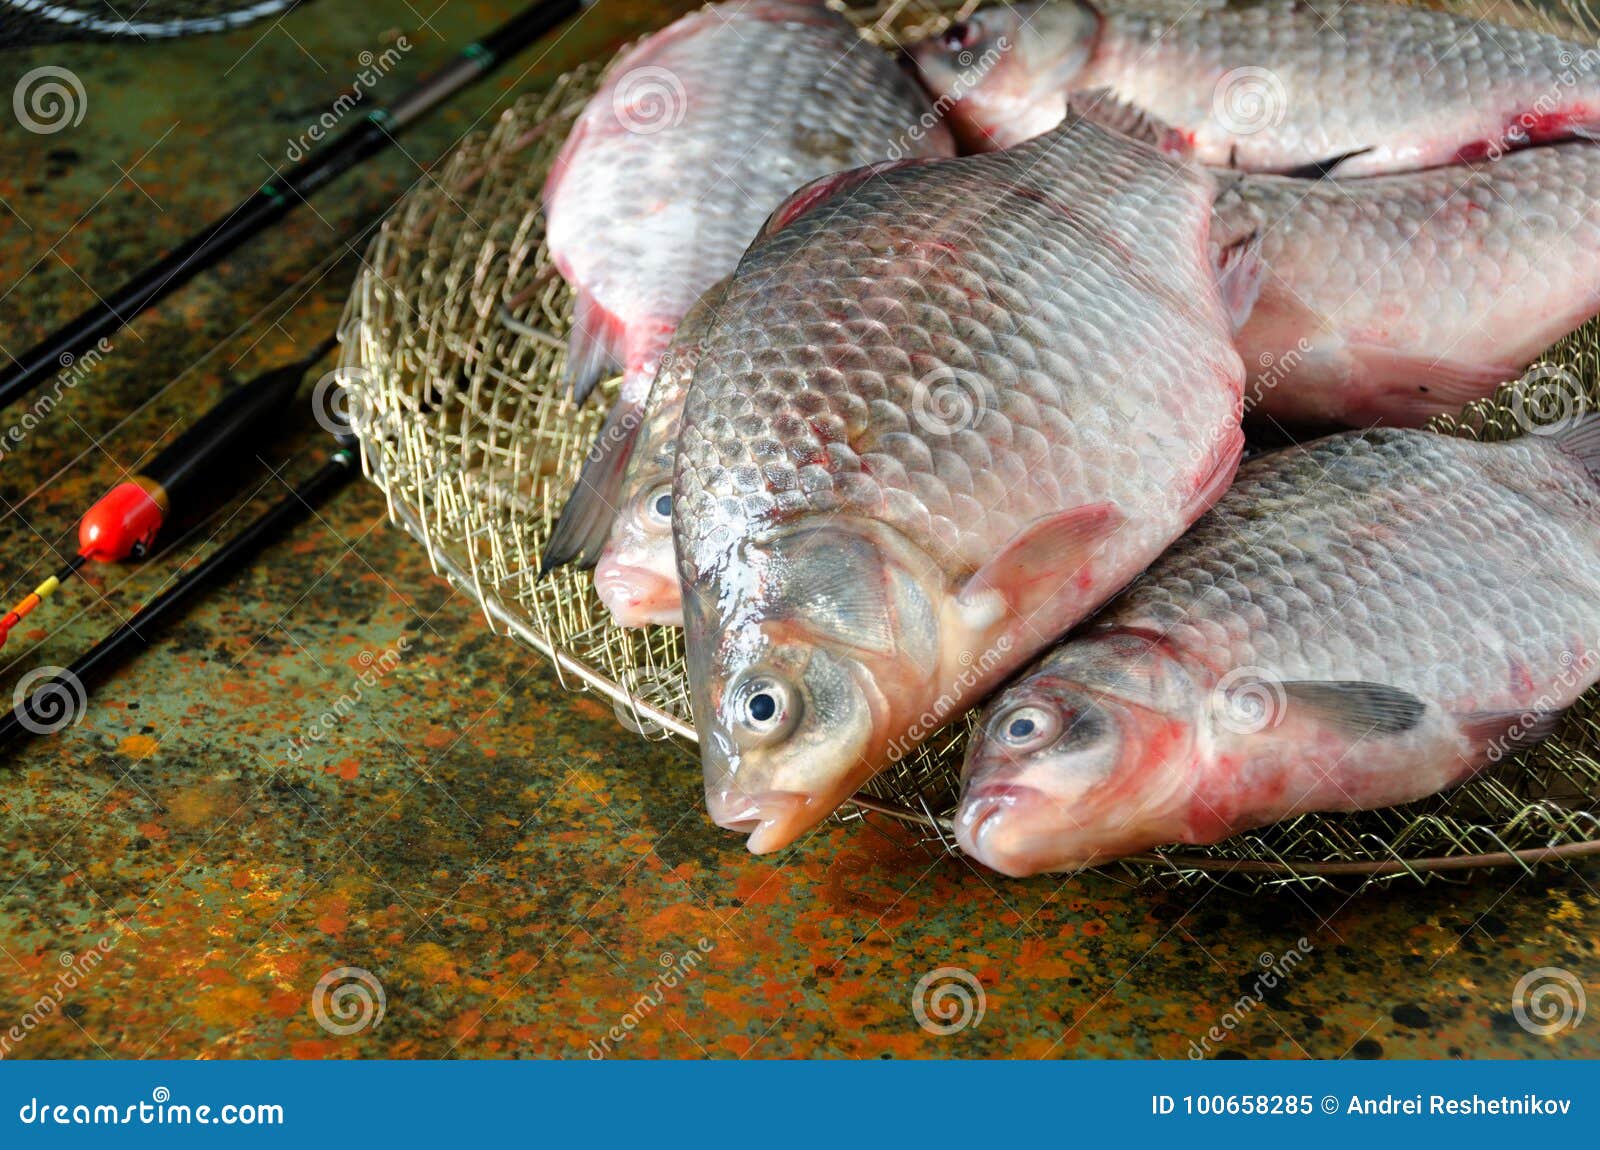 https://thumbs.dreamstime.com/z/group-crucian-carp-fishing-rod-cage-float-group-crucian-carp-fishing-rod-cage-float-bog-color-background-100658285.jpg